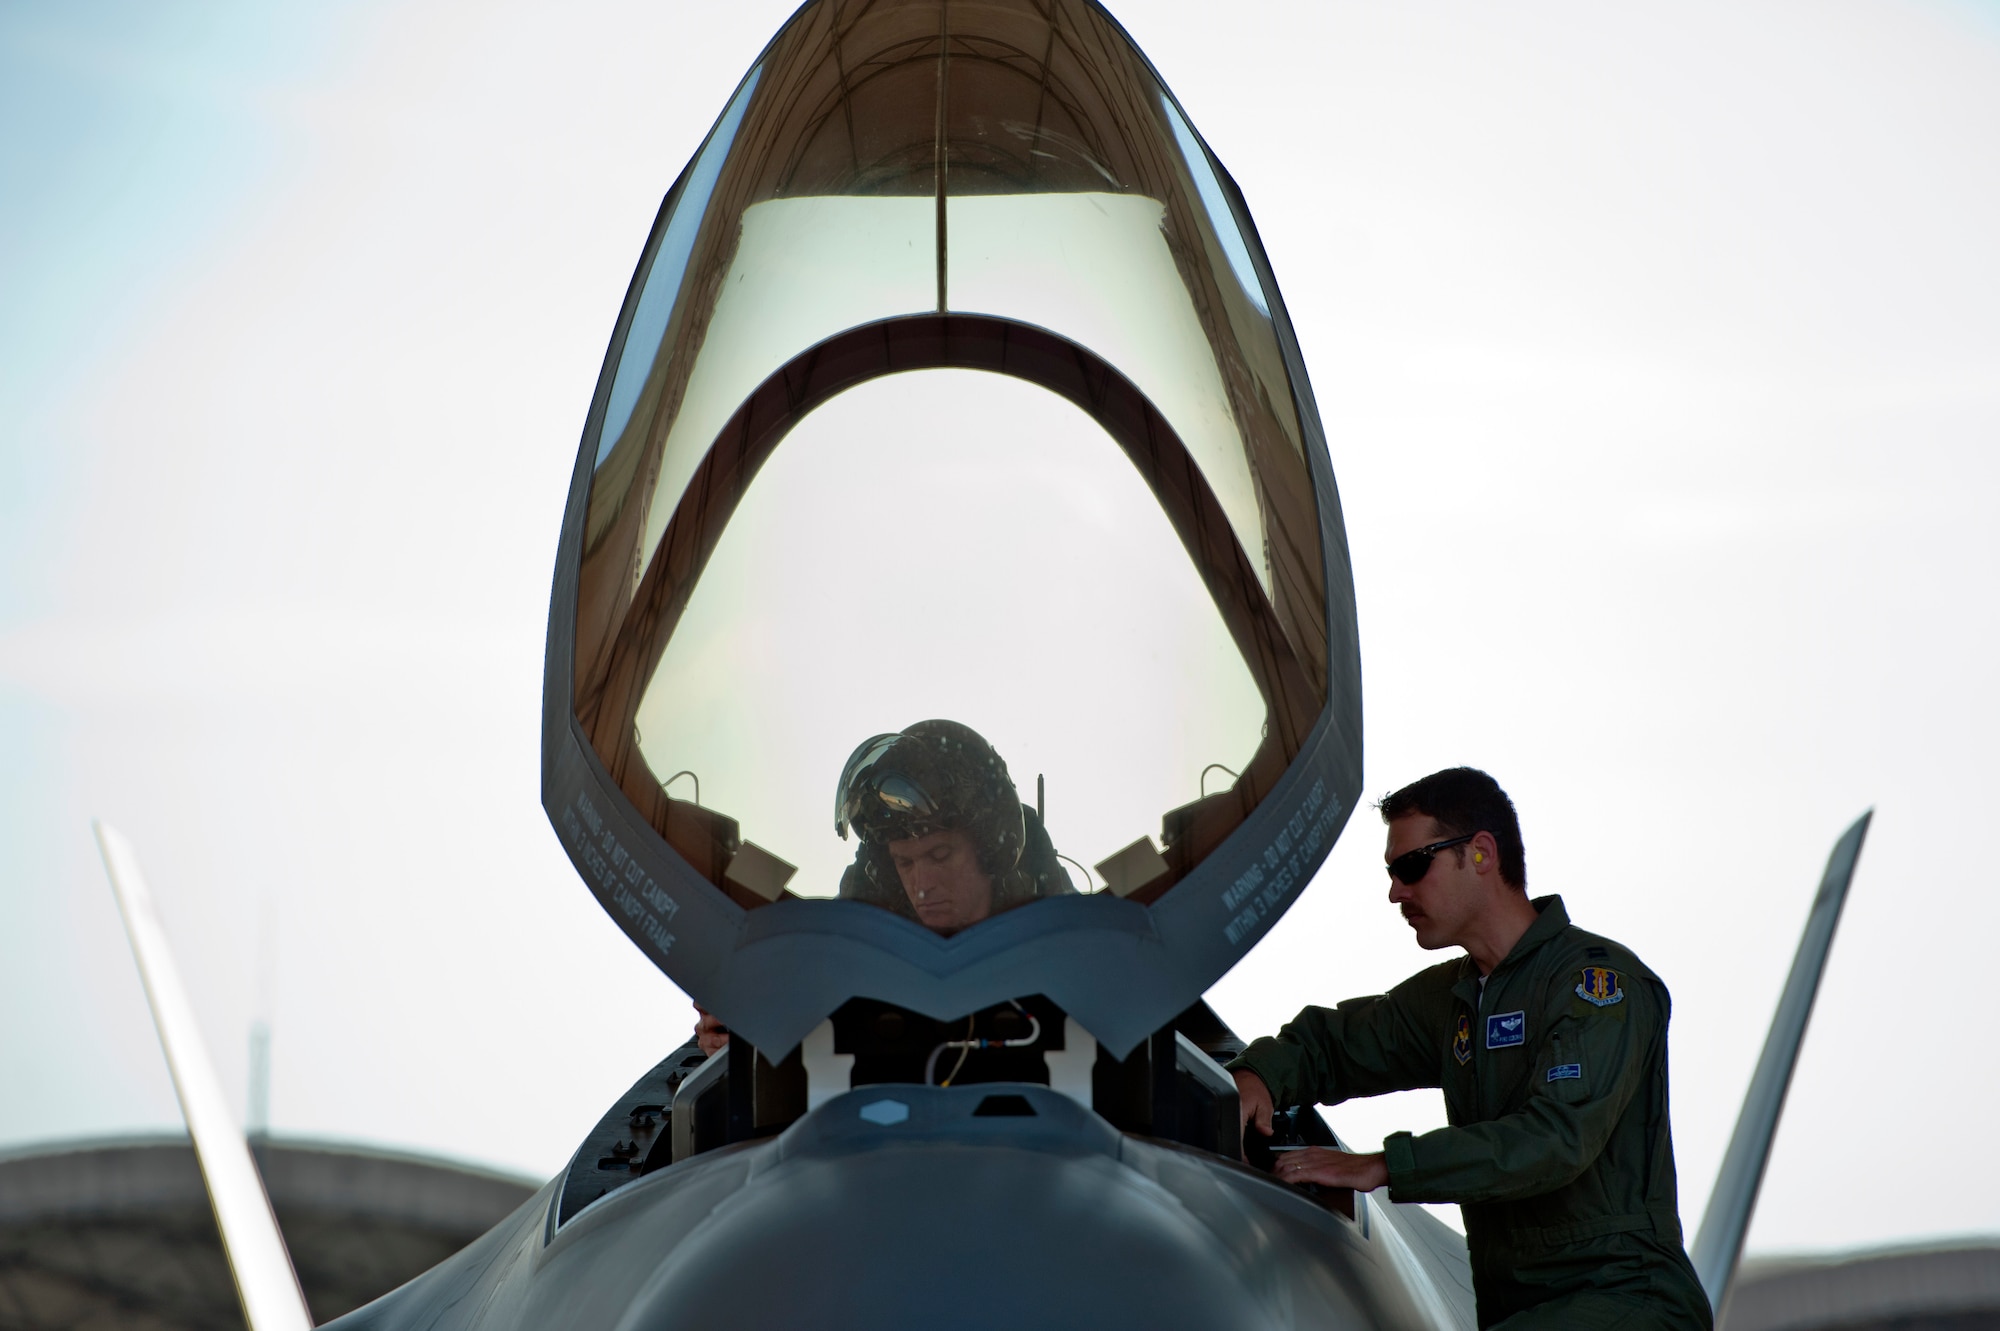 Royal Australian Air Force Squadron Leader Andrew Jackson, F-35 Lightning II student pilot, prepares for his first flight in an F-35A under the supervision of Capt. Jeffrey Osborne, 58th Fighter Squadron F-35 pilot and chief of standardization and evaluation, on Eglin Air Force Base, Fla., March 18, 2015. Jackson arrived in the United States in December 2014 and started his training at the F-35 Academic Training Center on Jan. 26, Australia Day. Since then, Jackson has completed 154 classroom hours and 64 hours throughout 16 flight simulations, before stepping to his first aircraft. (U.S. Air Force photo/Staff Sgt. Marleah Robertson)